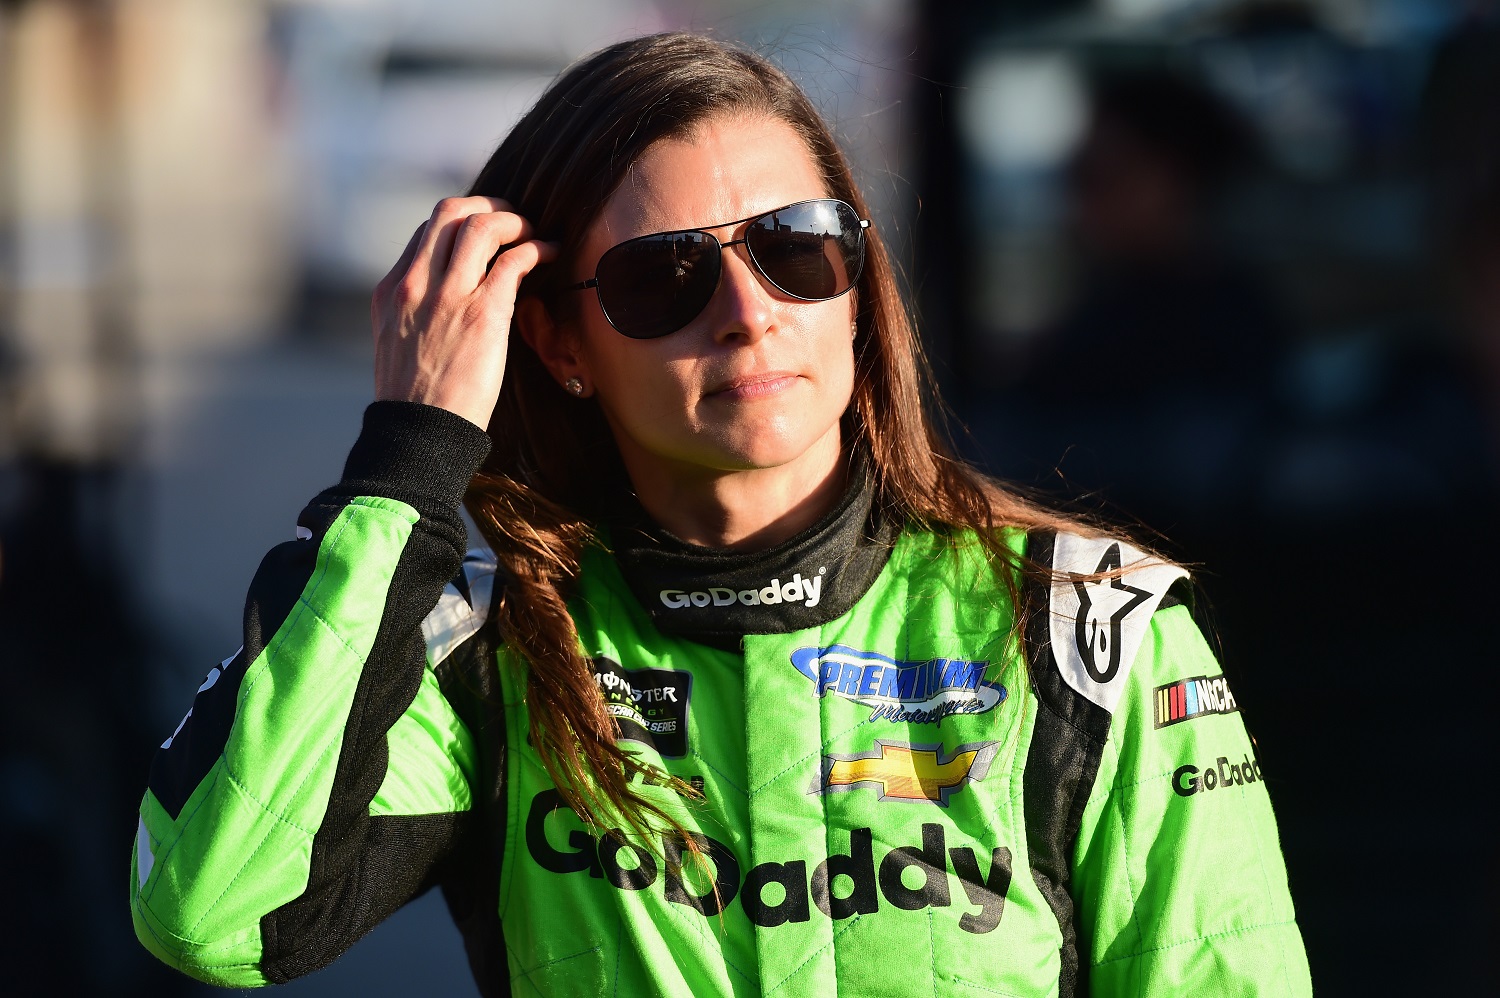 Danica Patrick, driver of the GoDaddy Chevrolet, walks from the infield care center after being involved in an on-track incident during the Daytona 500 at Daytona International Speedway on Feb. 18, 2018.